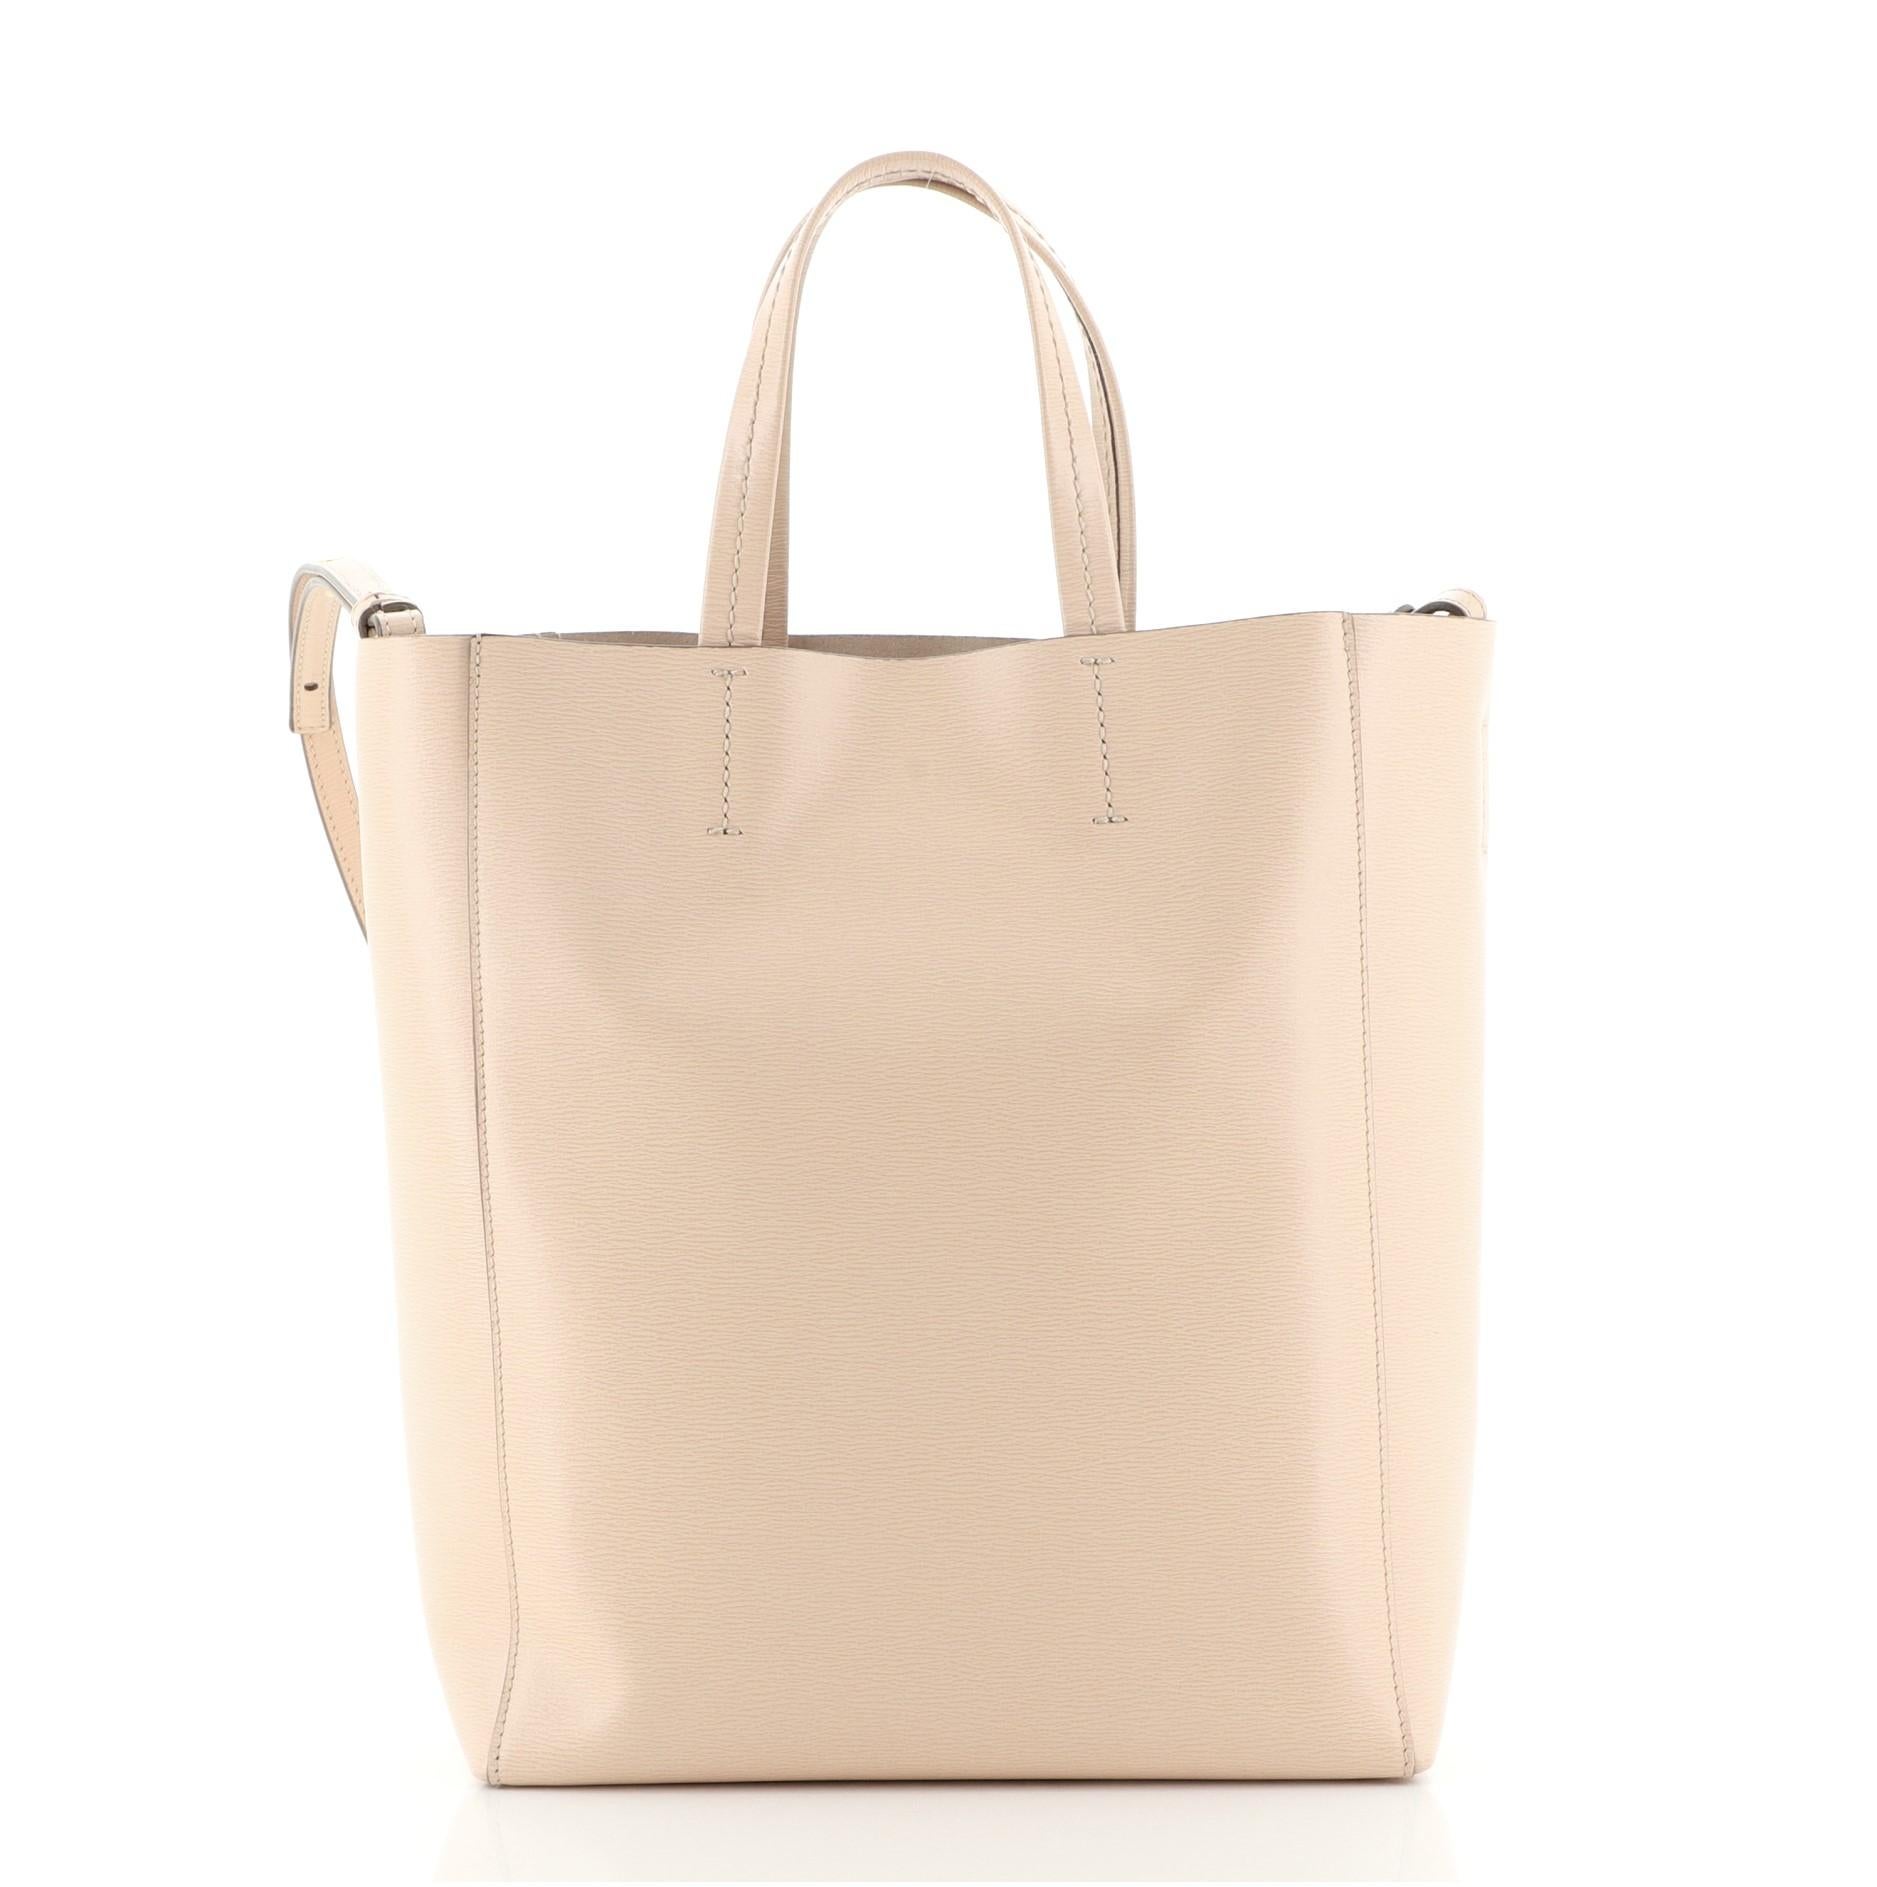 Celine Vertical Cabas Tote Grained Calfskin Small
Neutral

Condition Details: Wear on base corners and in interior, small mark on front. Cracking on side opening trim wax edges, scratches on hardware.

50141MSC

Height 11